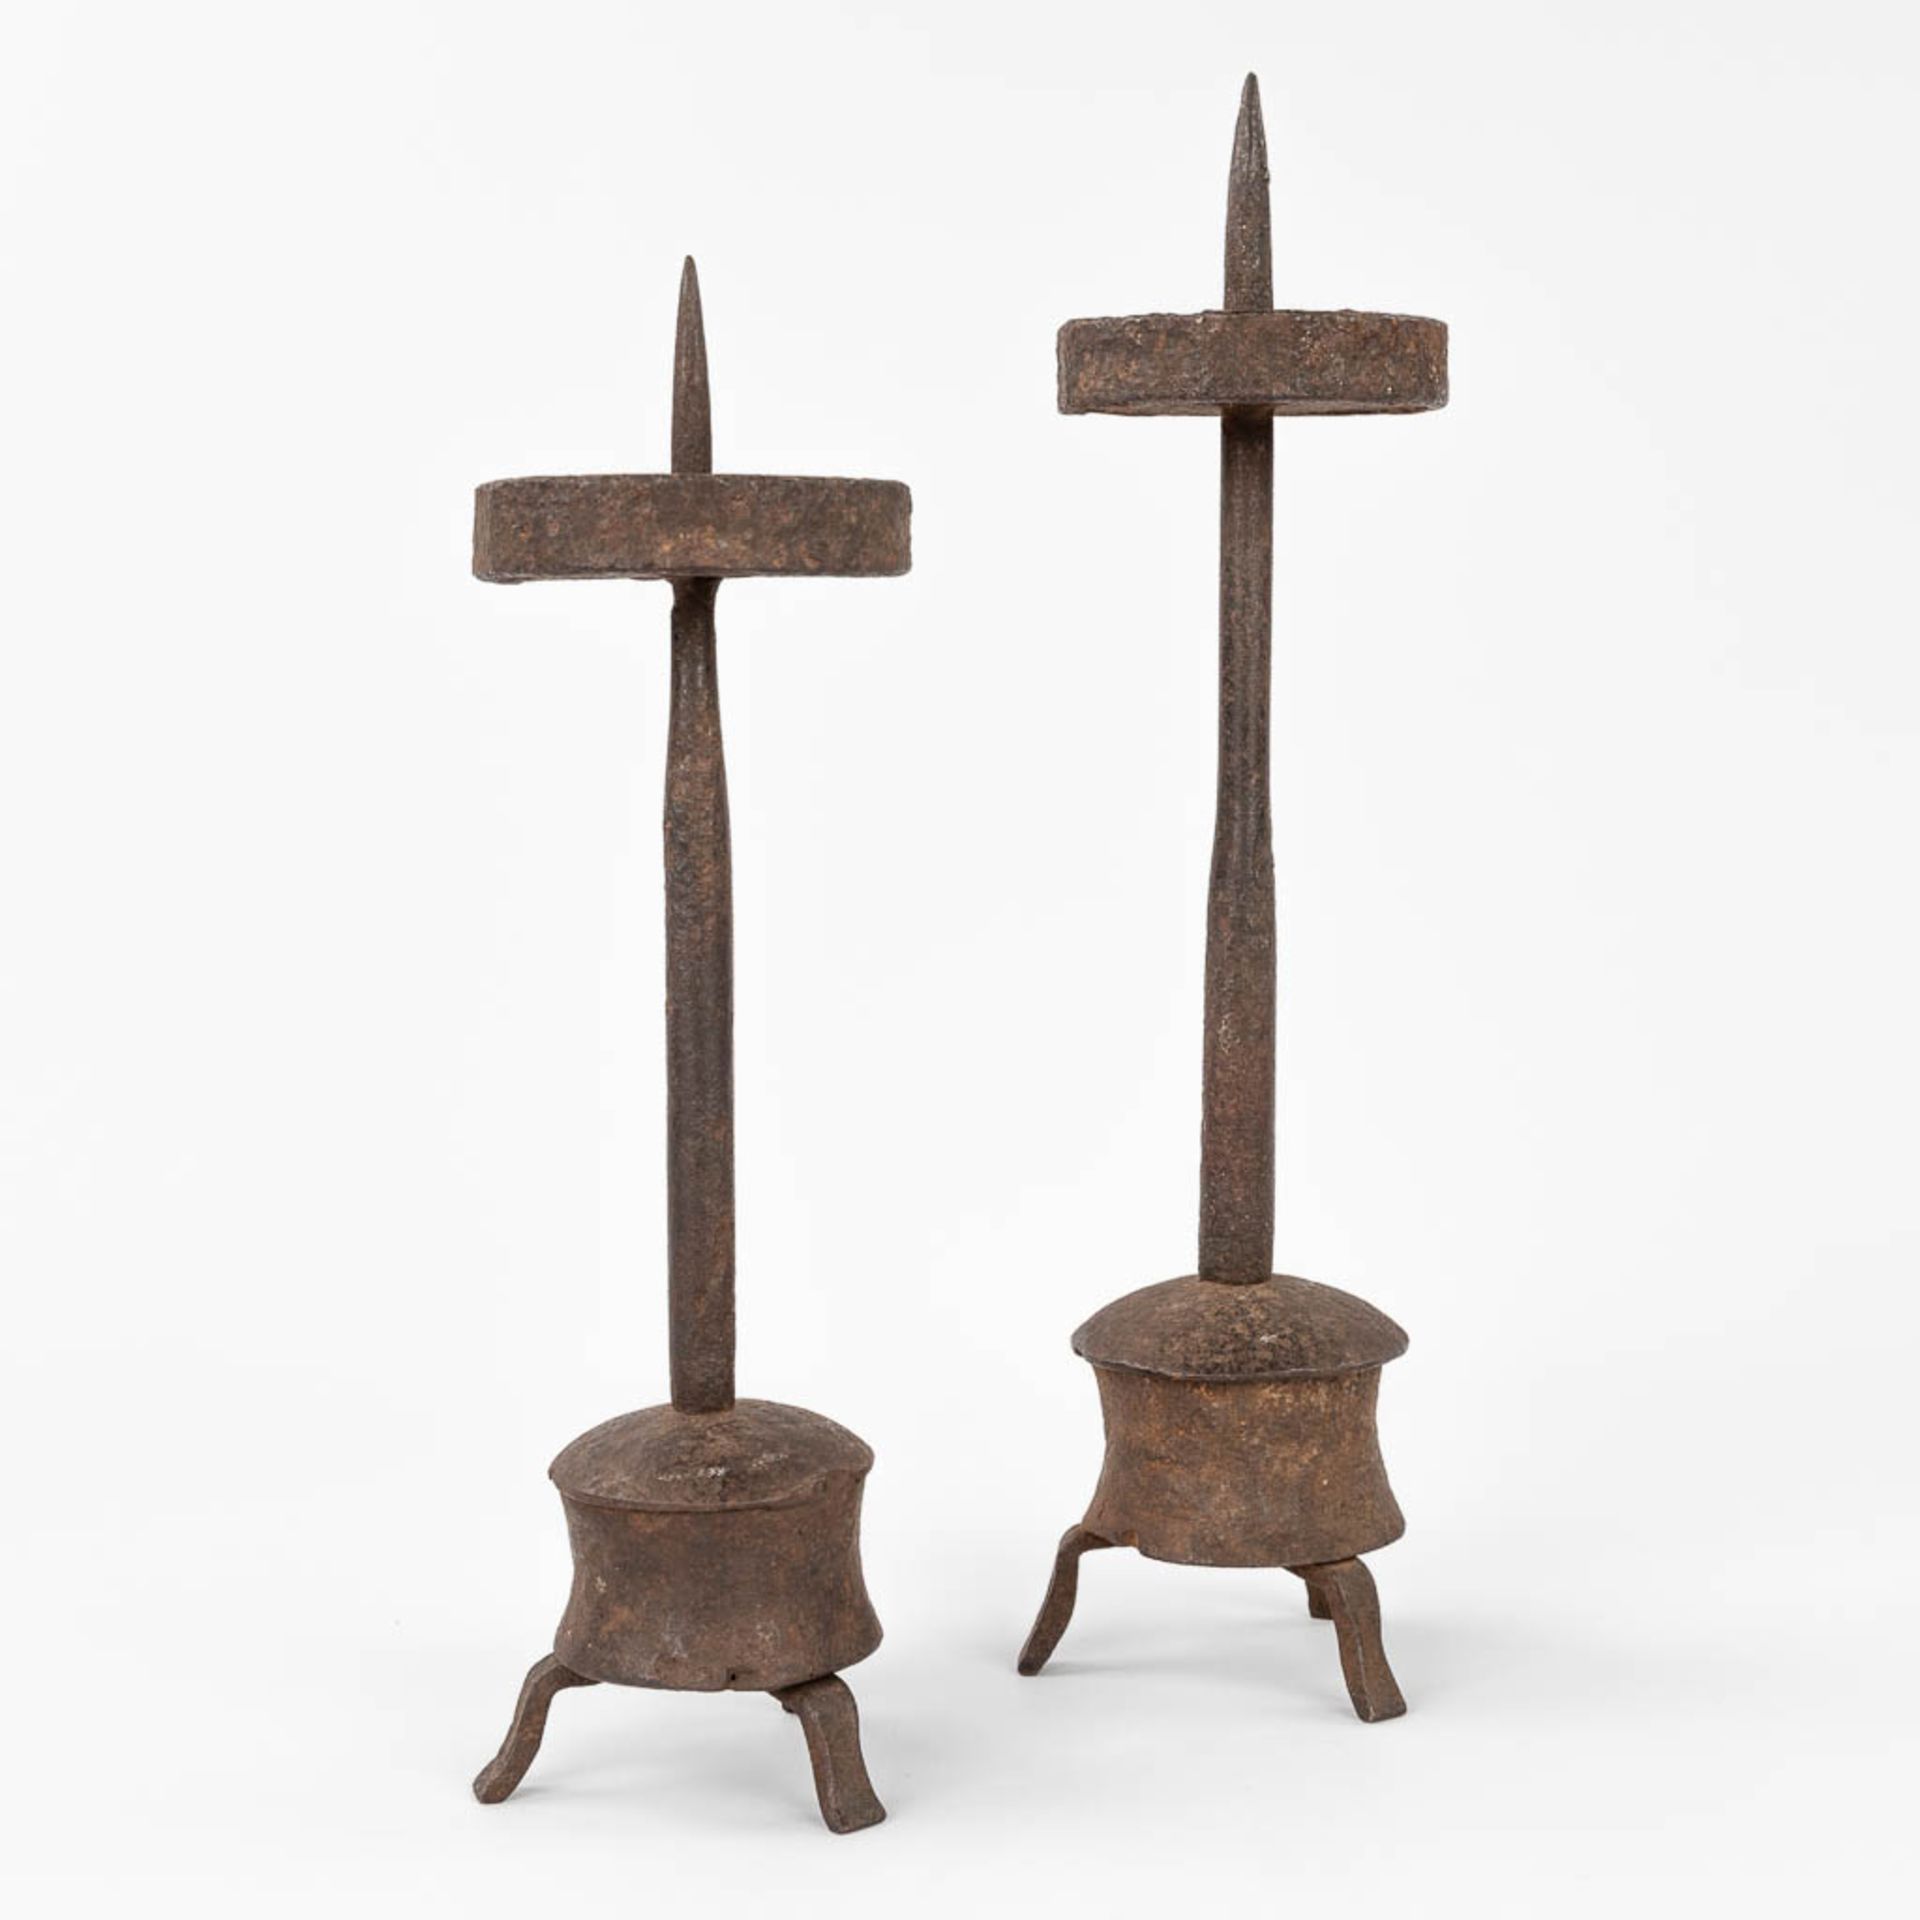 A pair of antique candlesticks made of wrought iron. Probably made in Southern Europe. (H:34 cm)